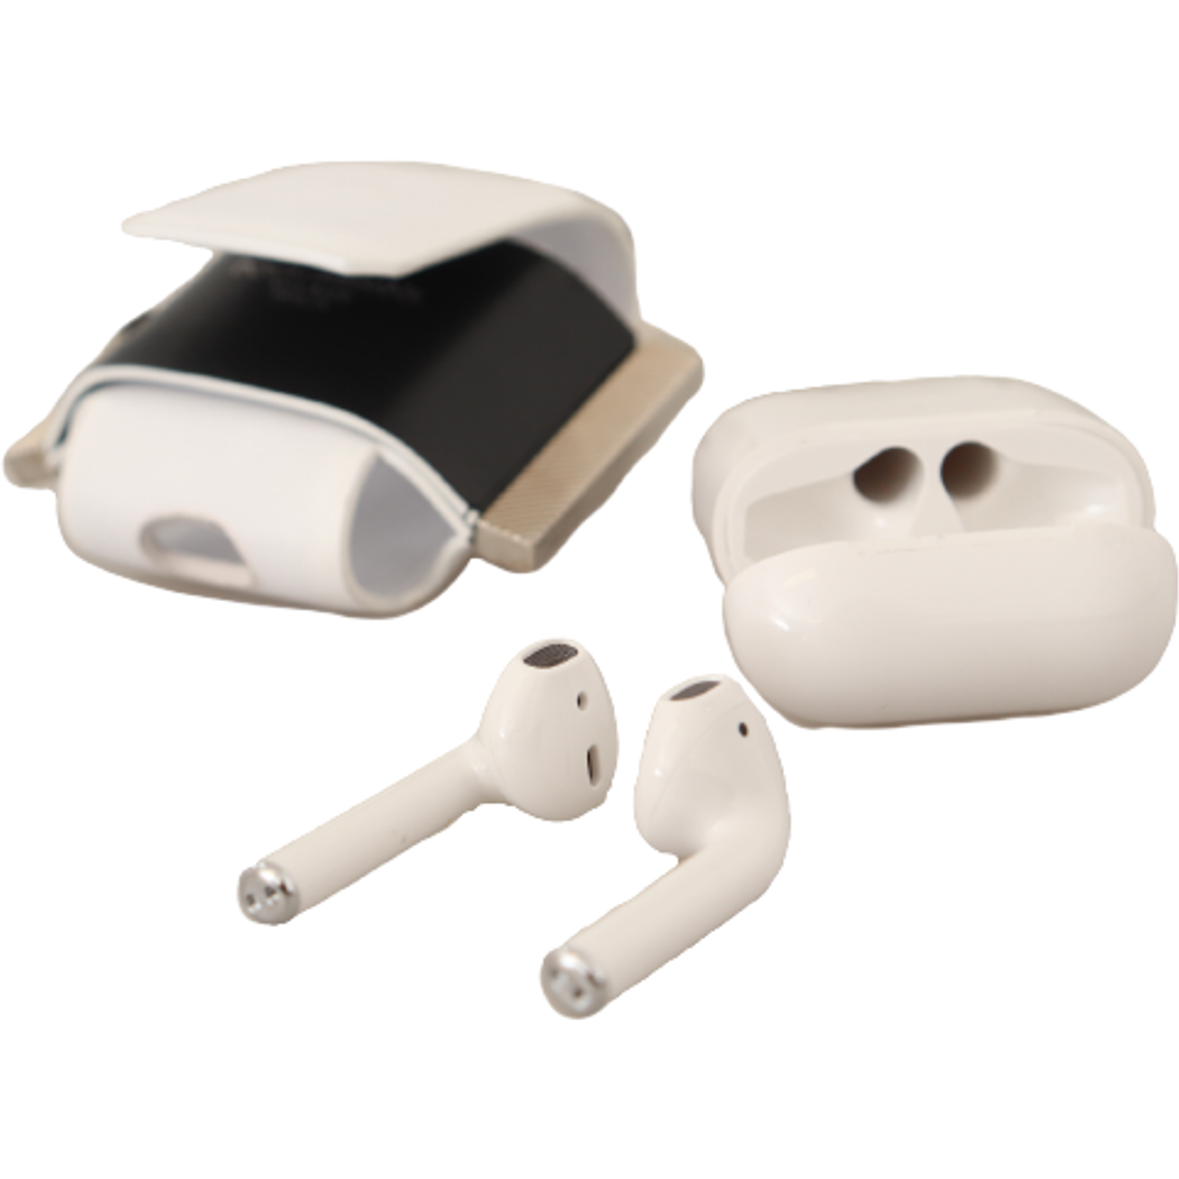 Dolce & Gabbana Chic Leather Airpods Case in Monochrome white-black-leather-strap-silver-metal-logo-airpods-case